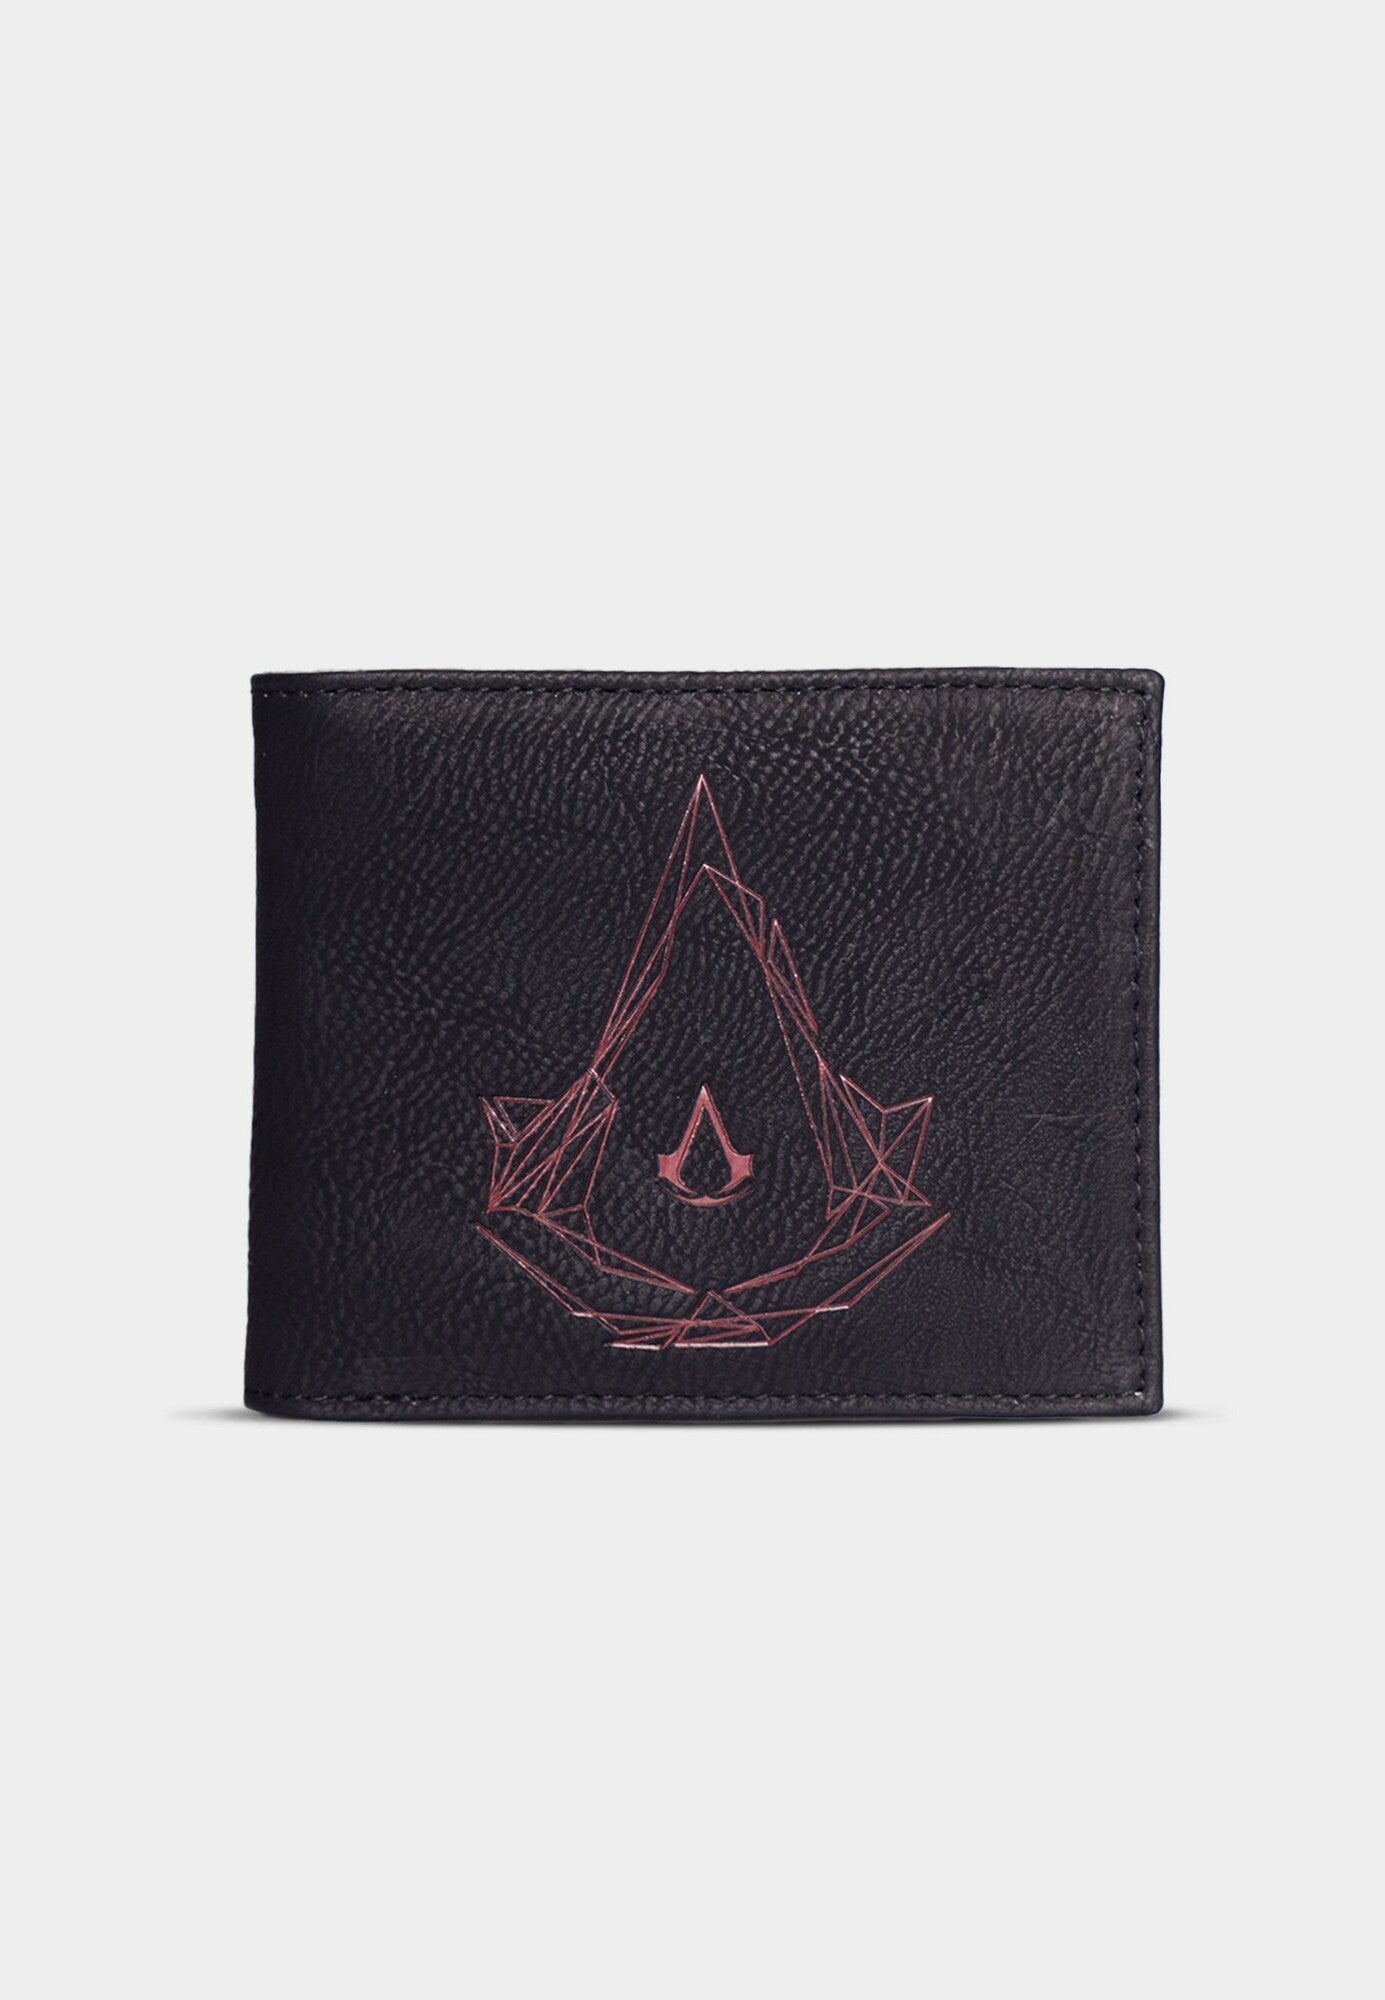  Assassin's Creed: Bifold Wallet  8718526146424